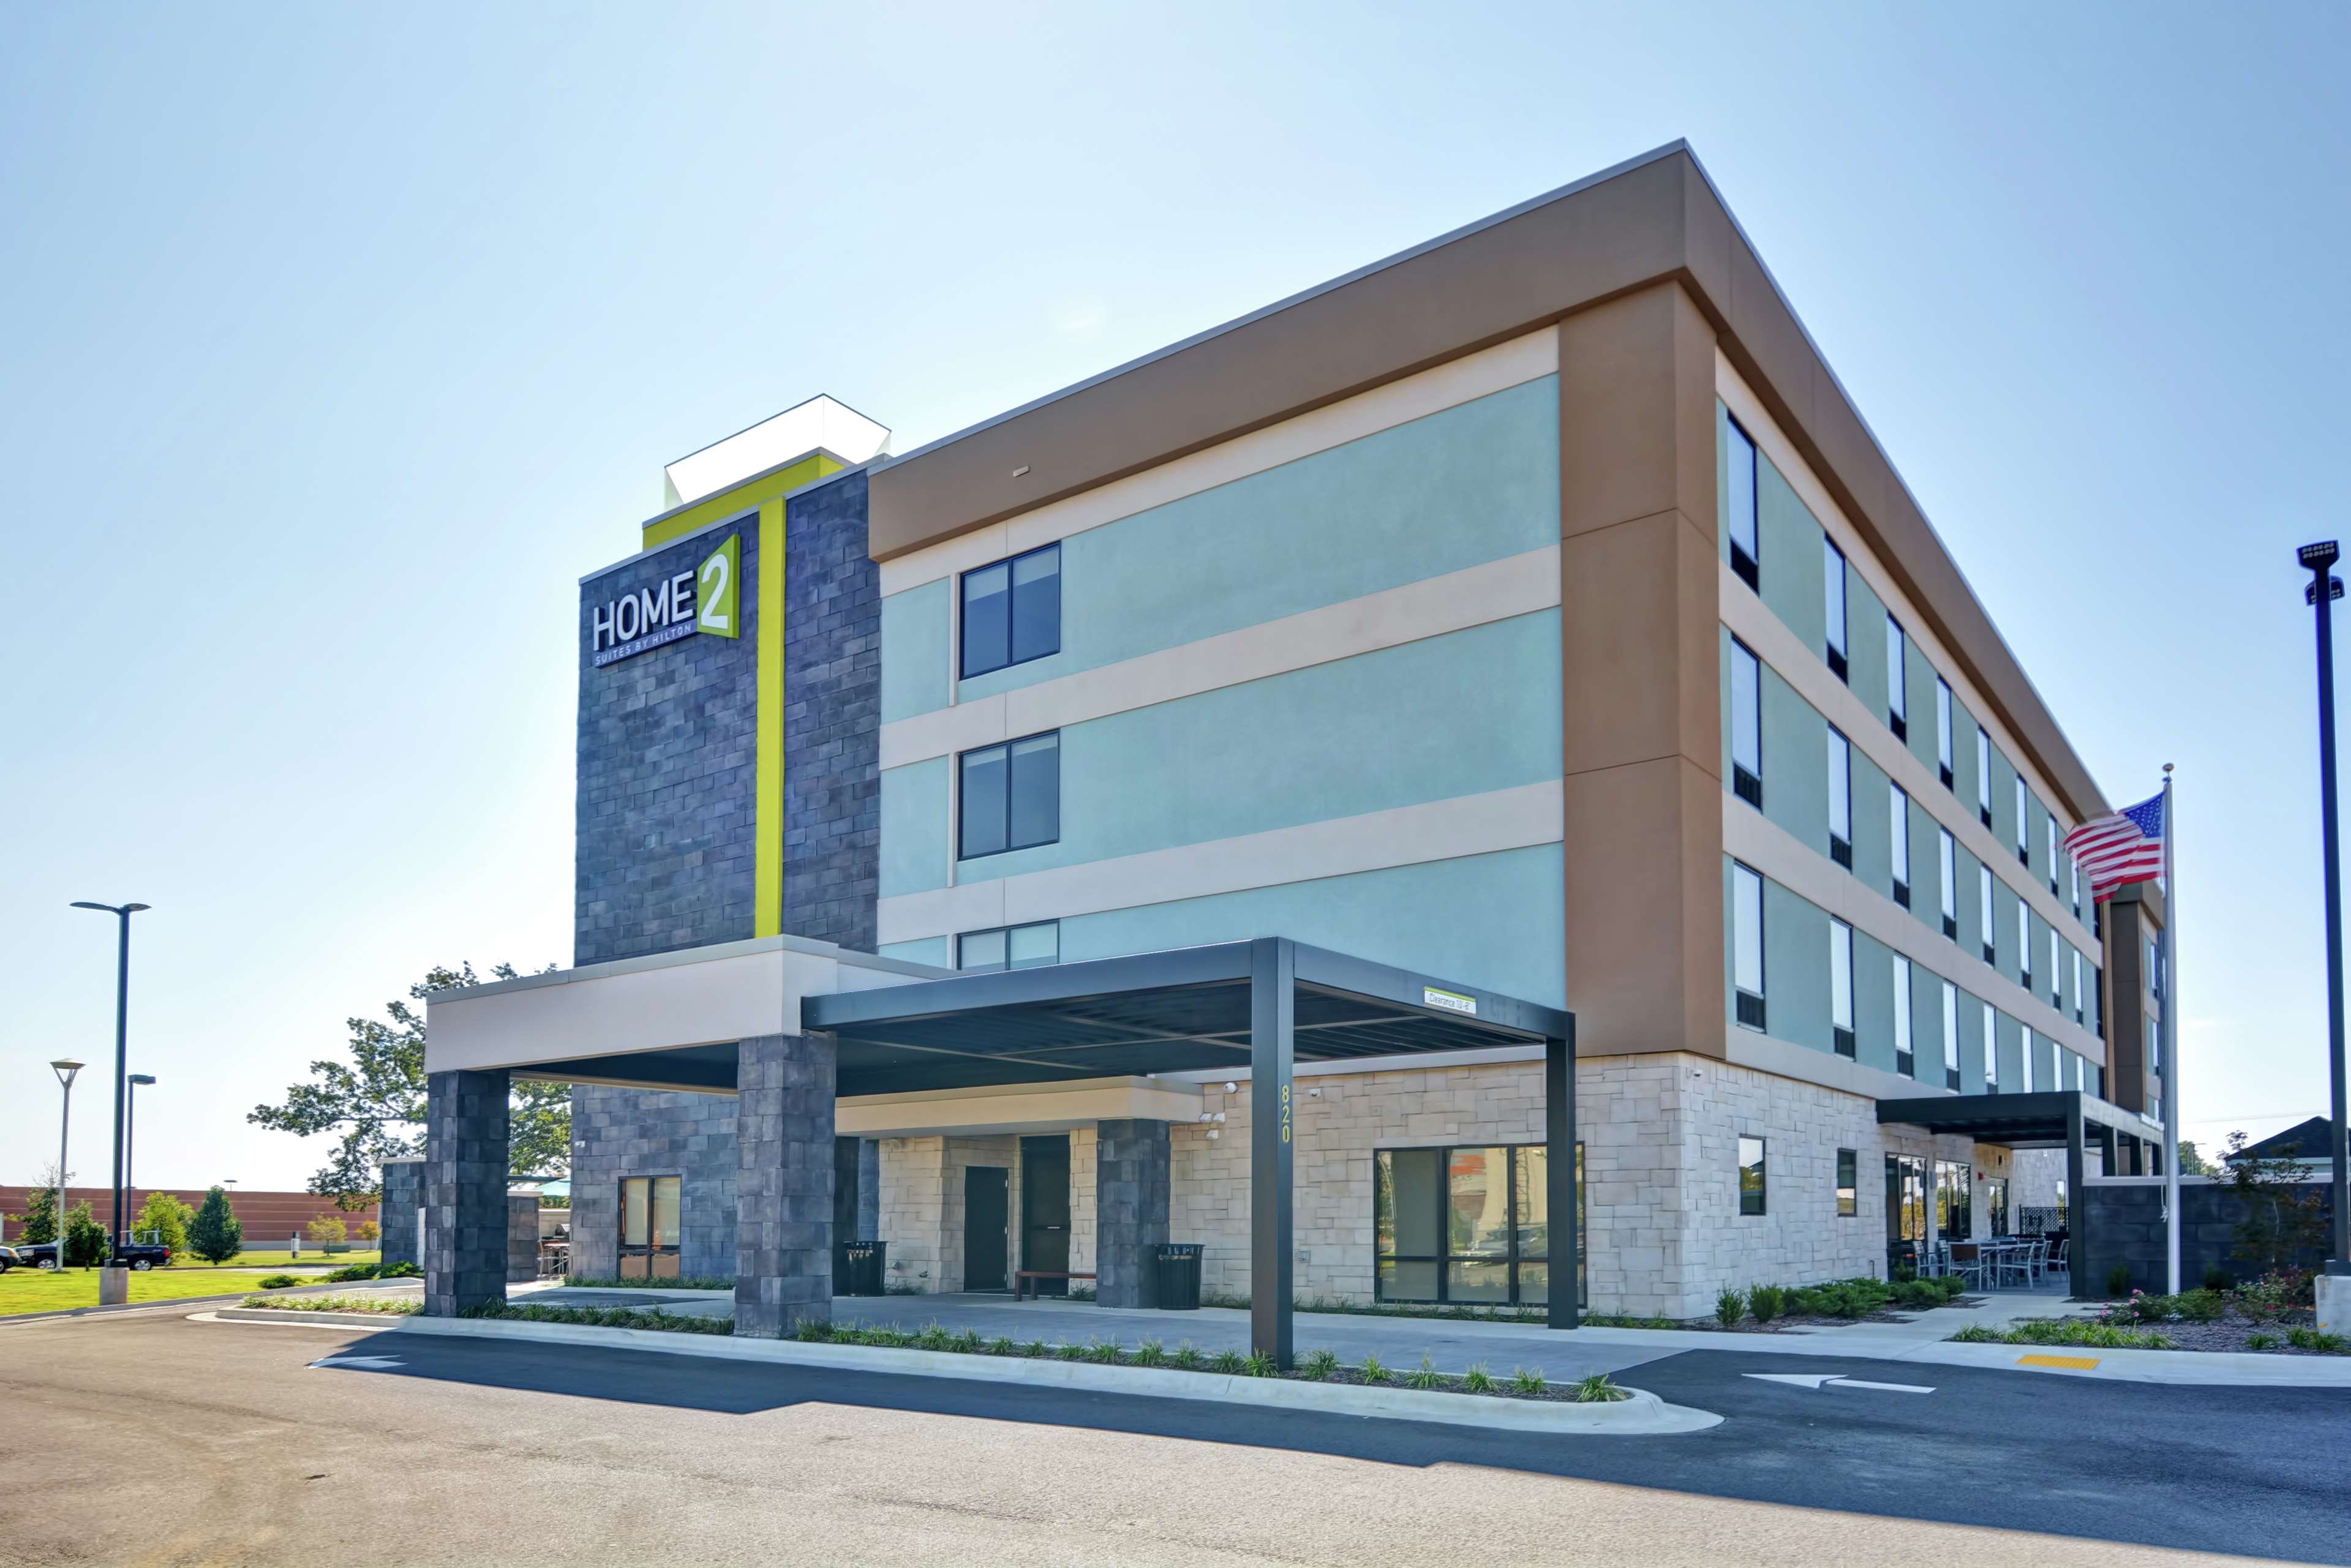 Home2 Suites by Hilton Conway image